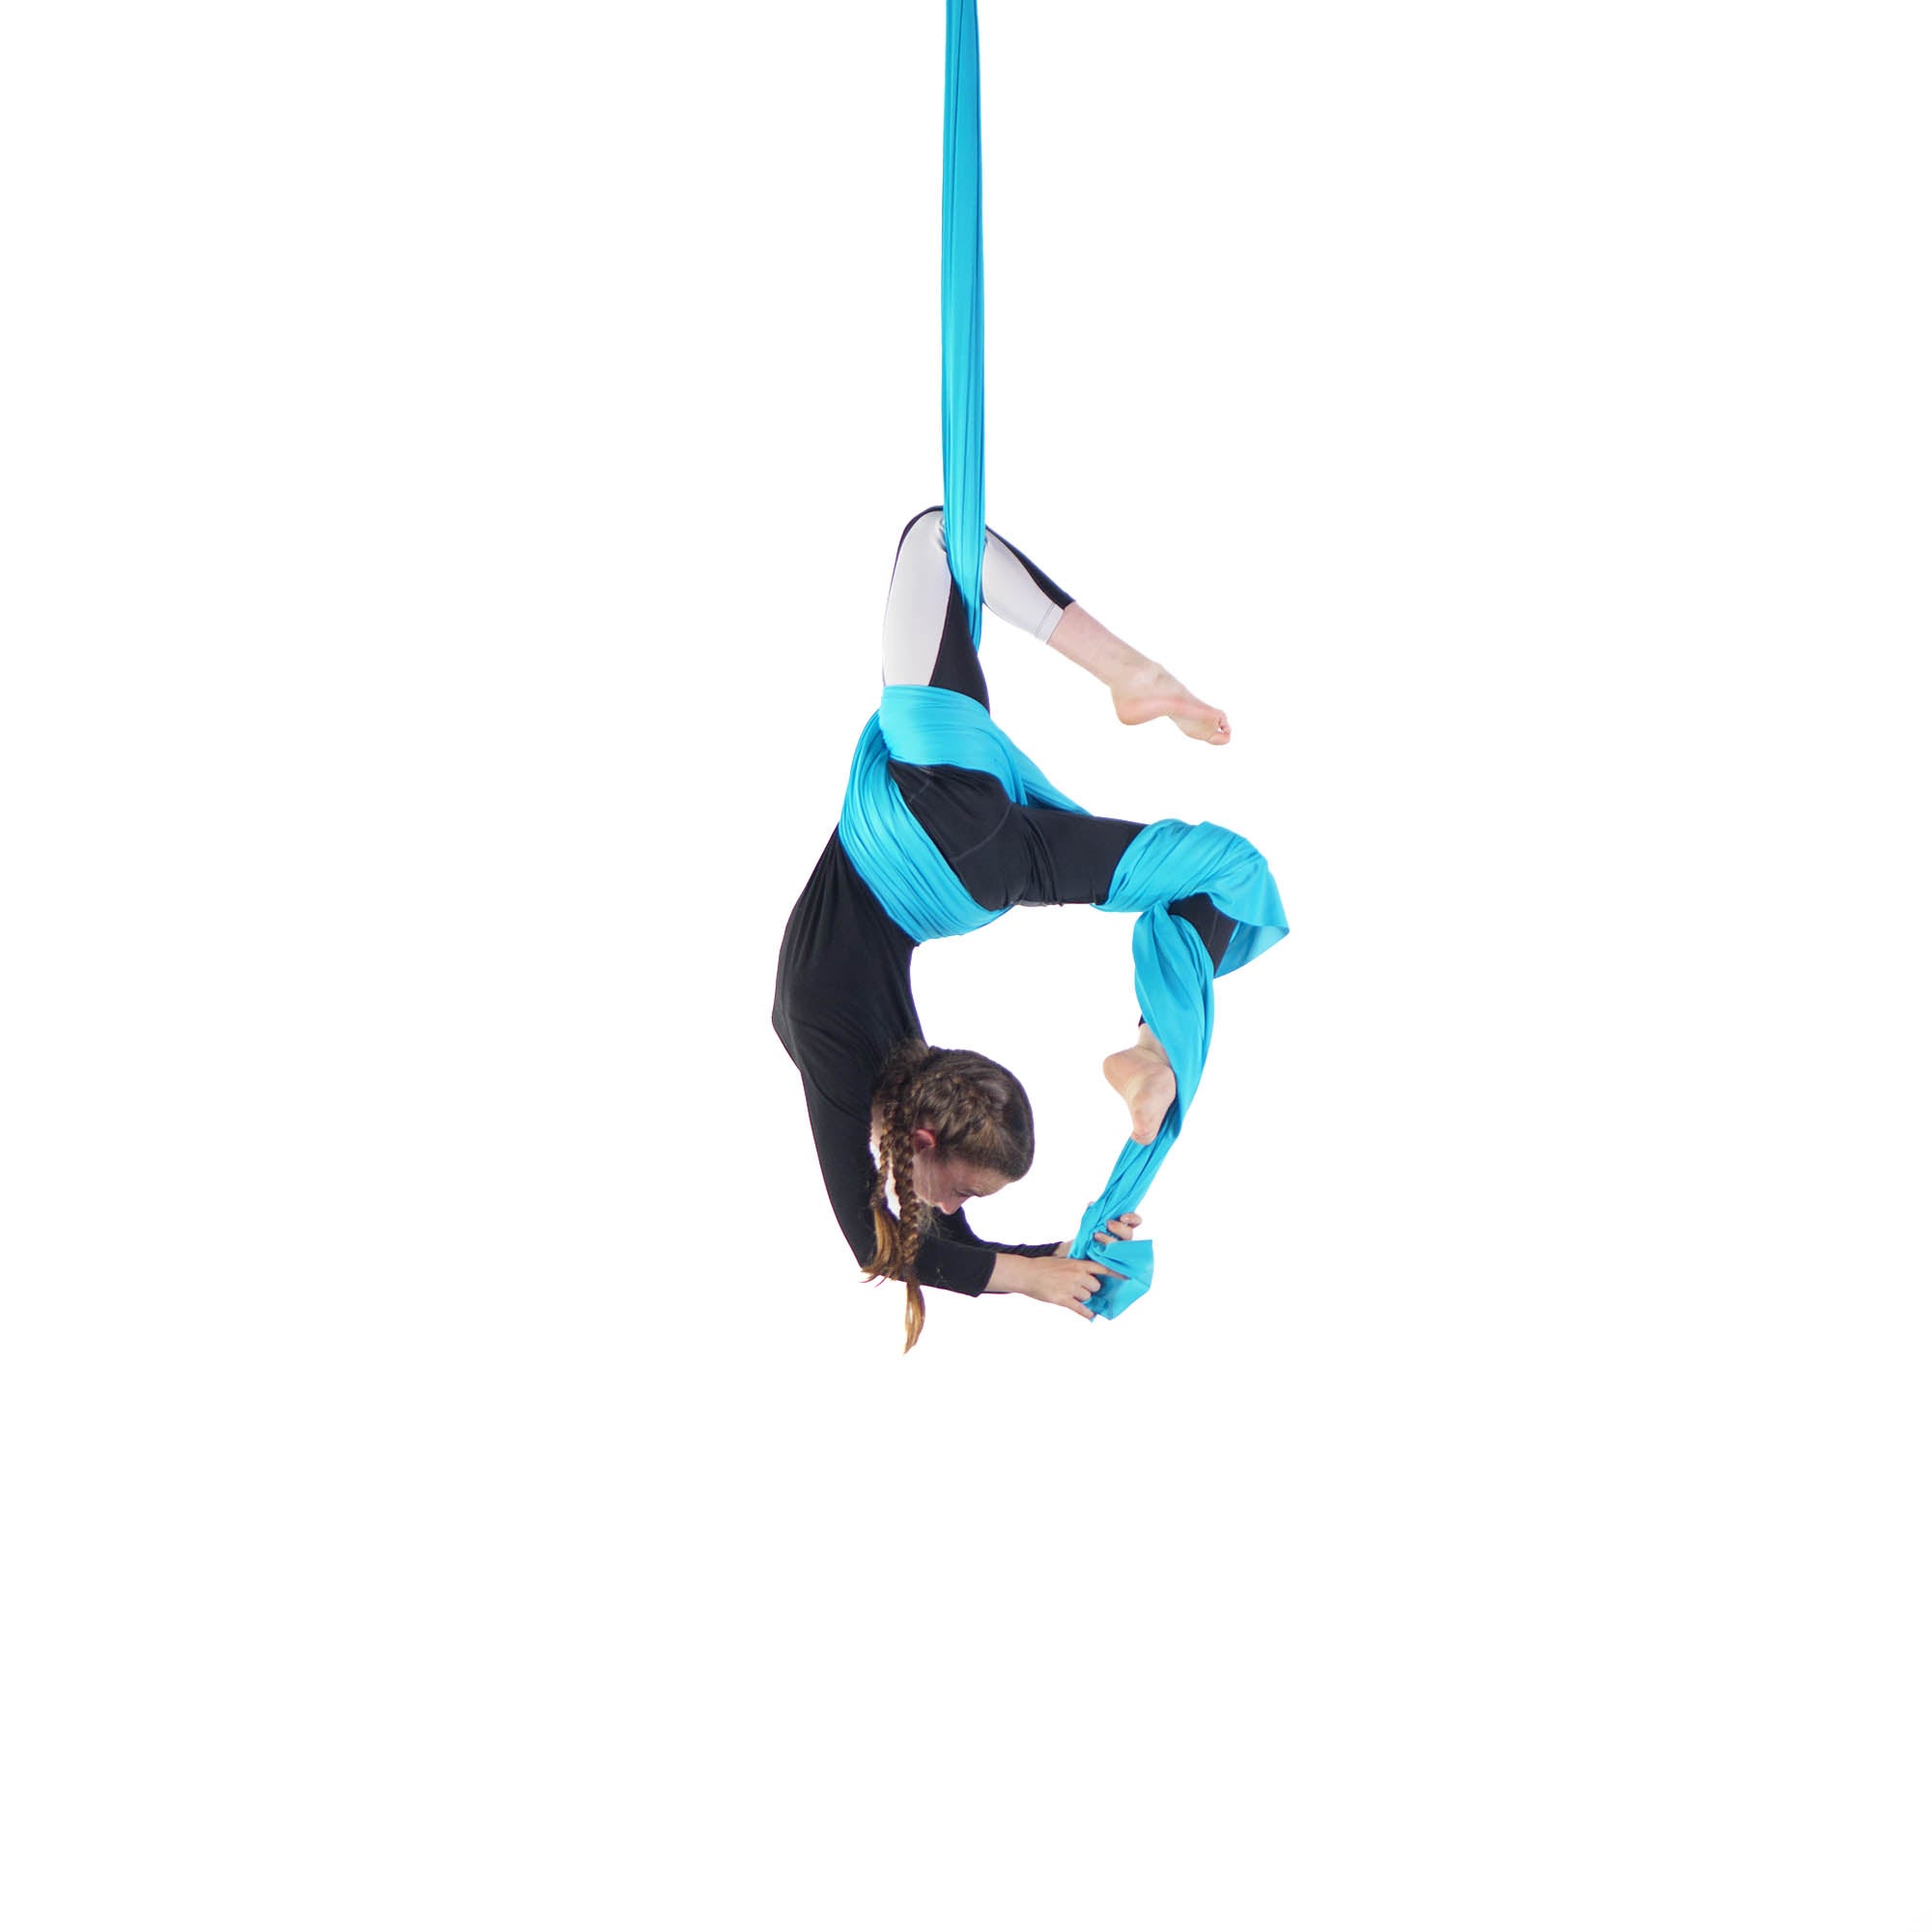 young performer on aerial silks